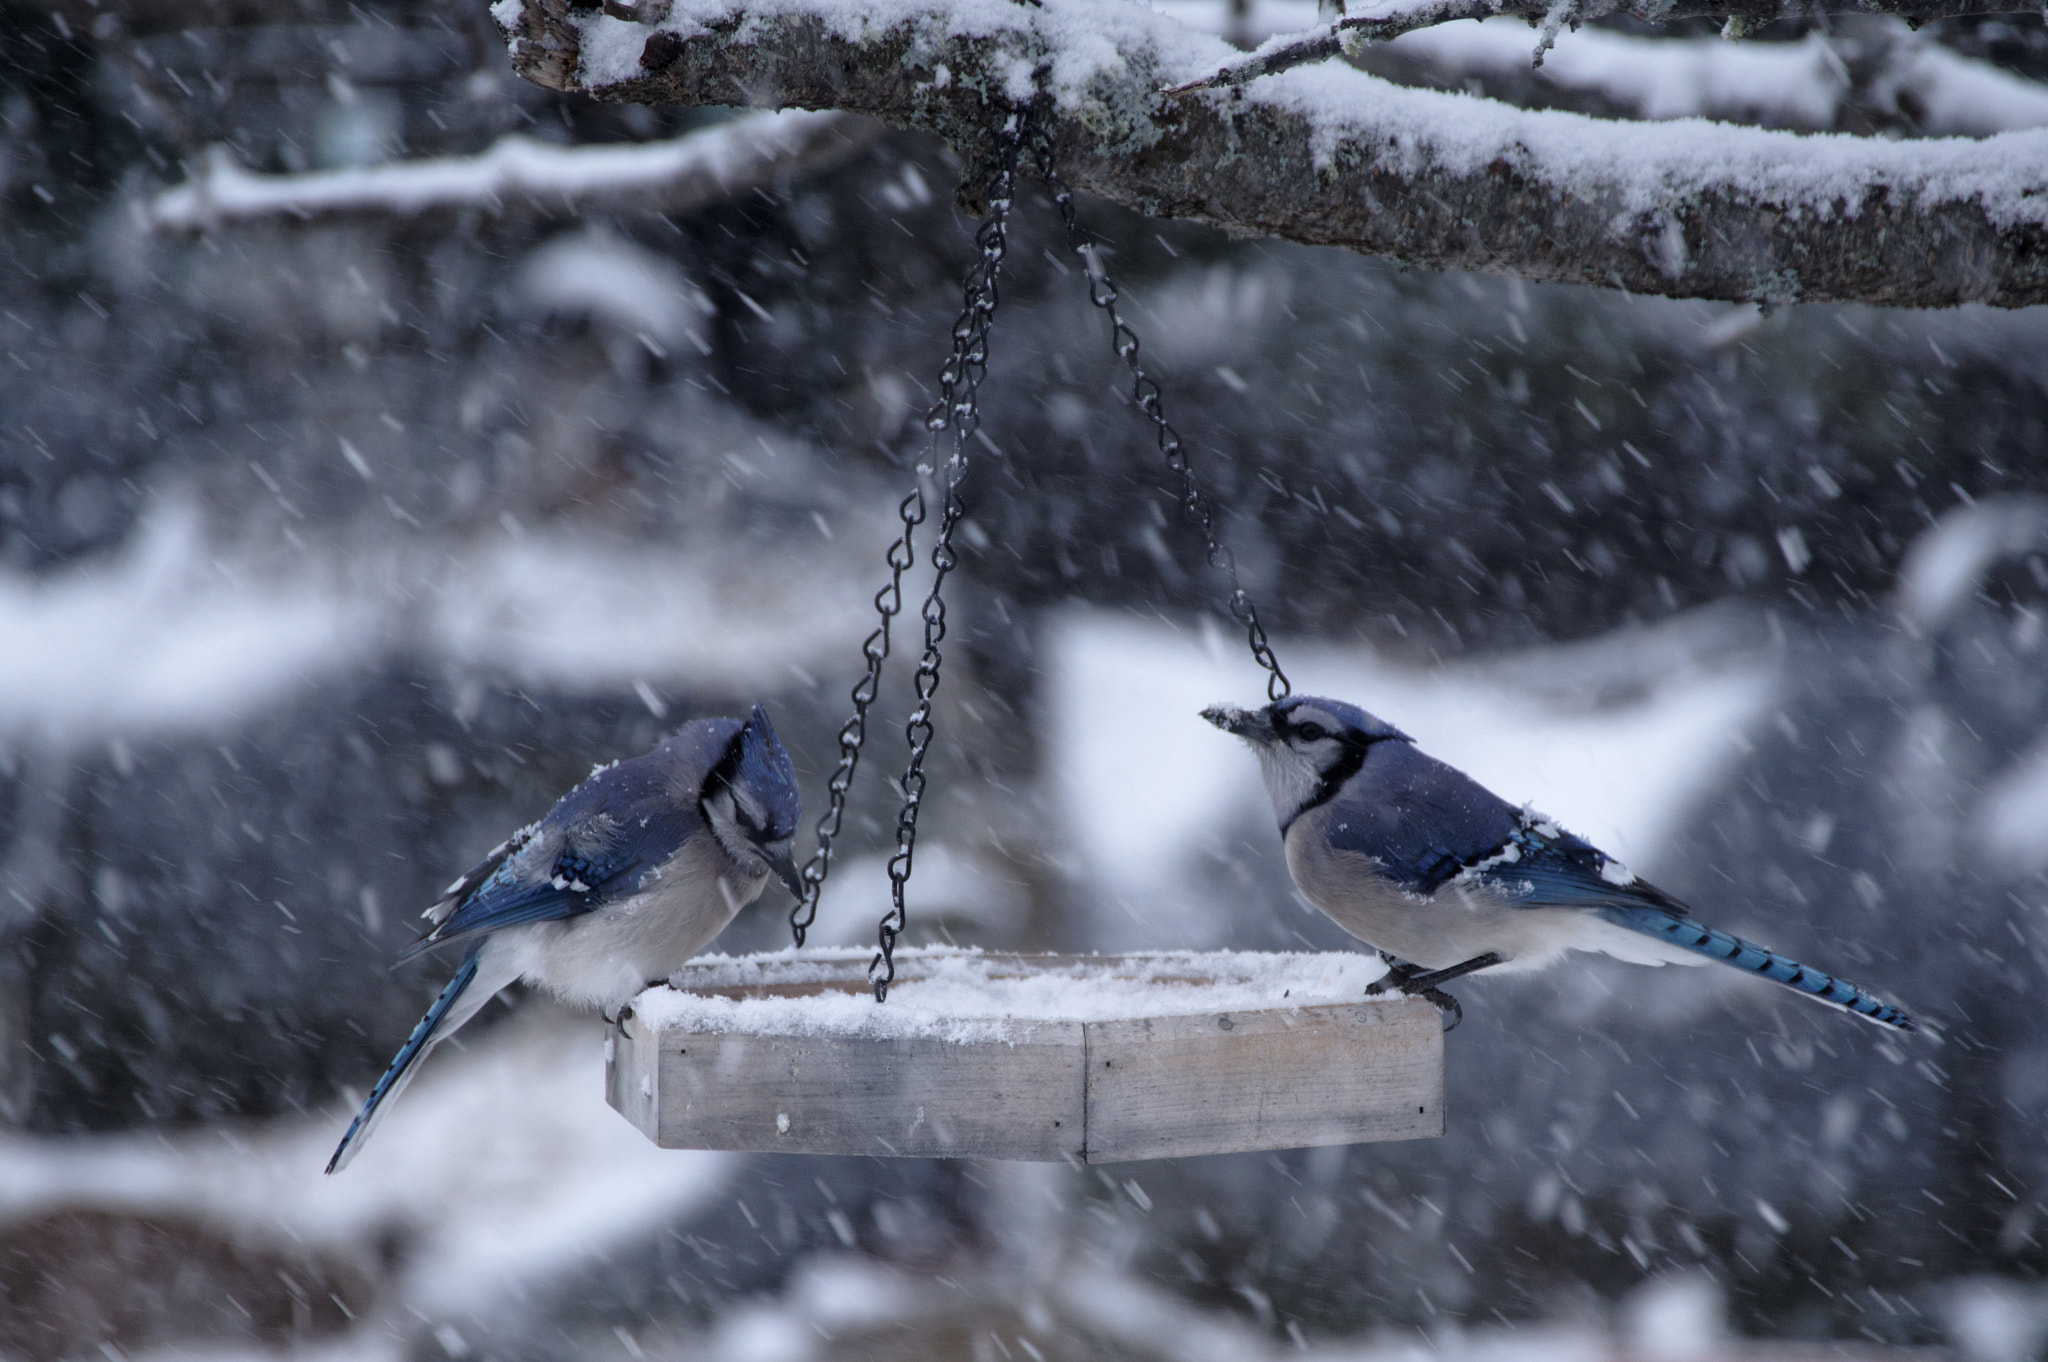 Pentax KP sample photo. Two jays having a cold lunch photography